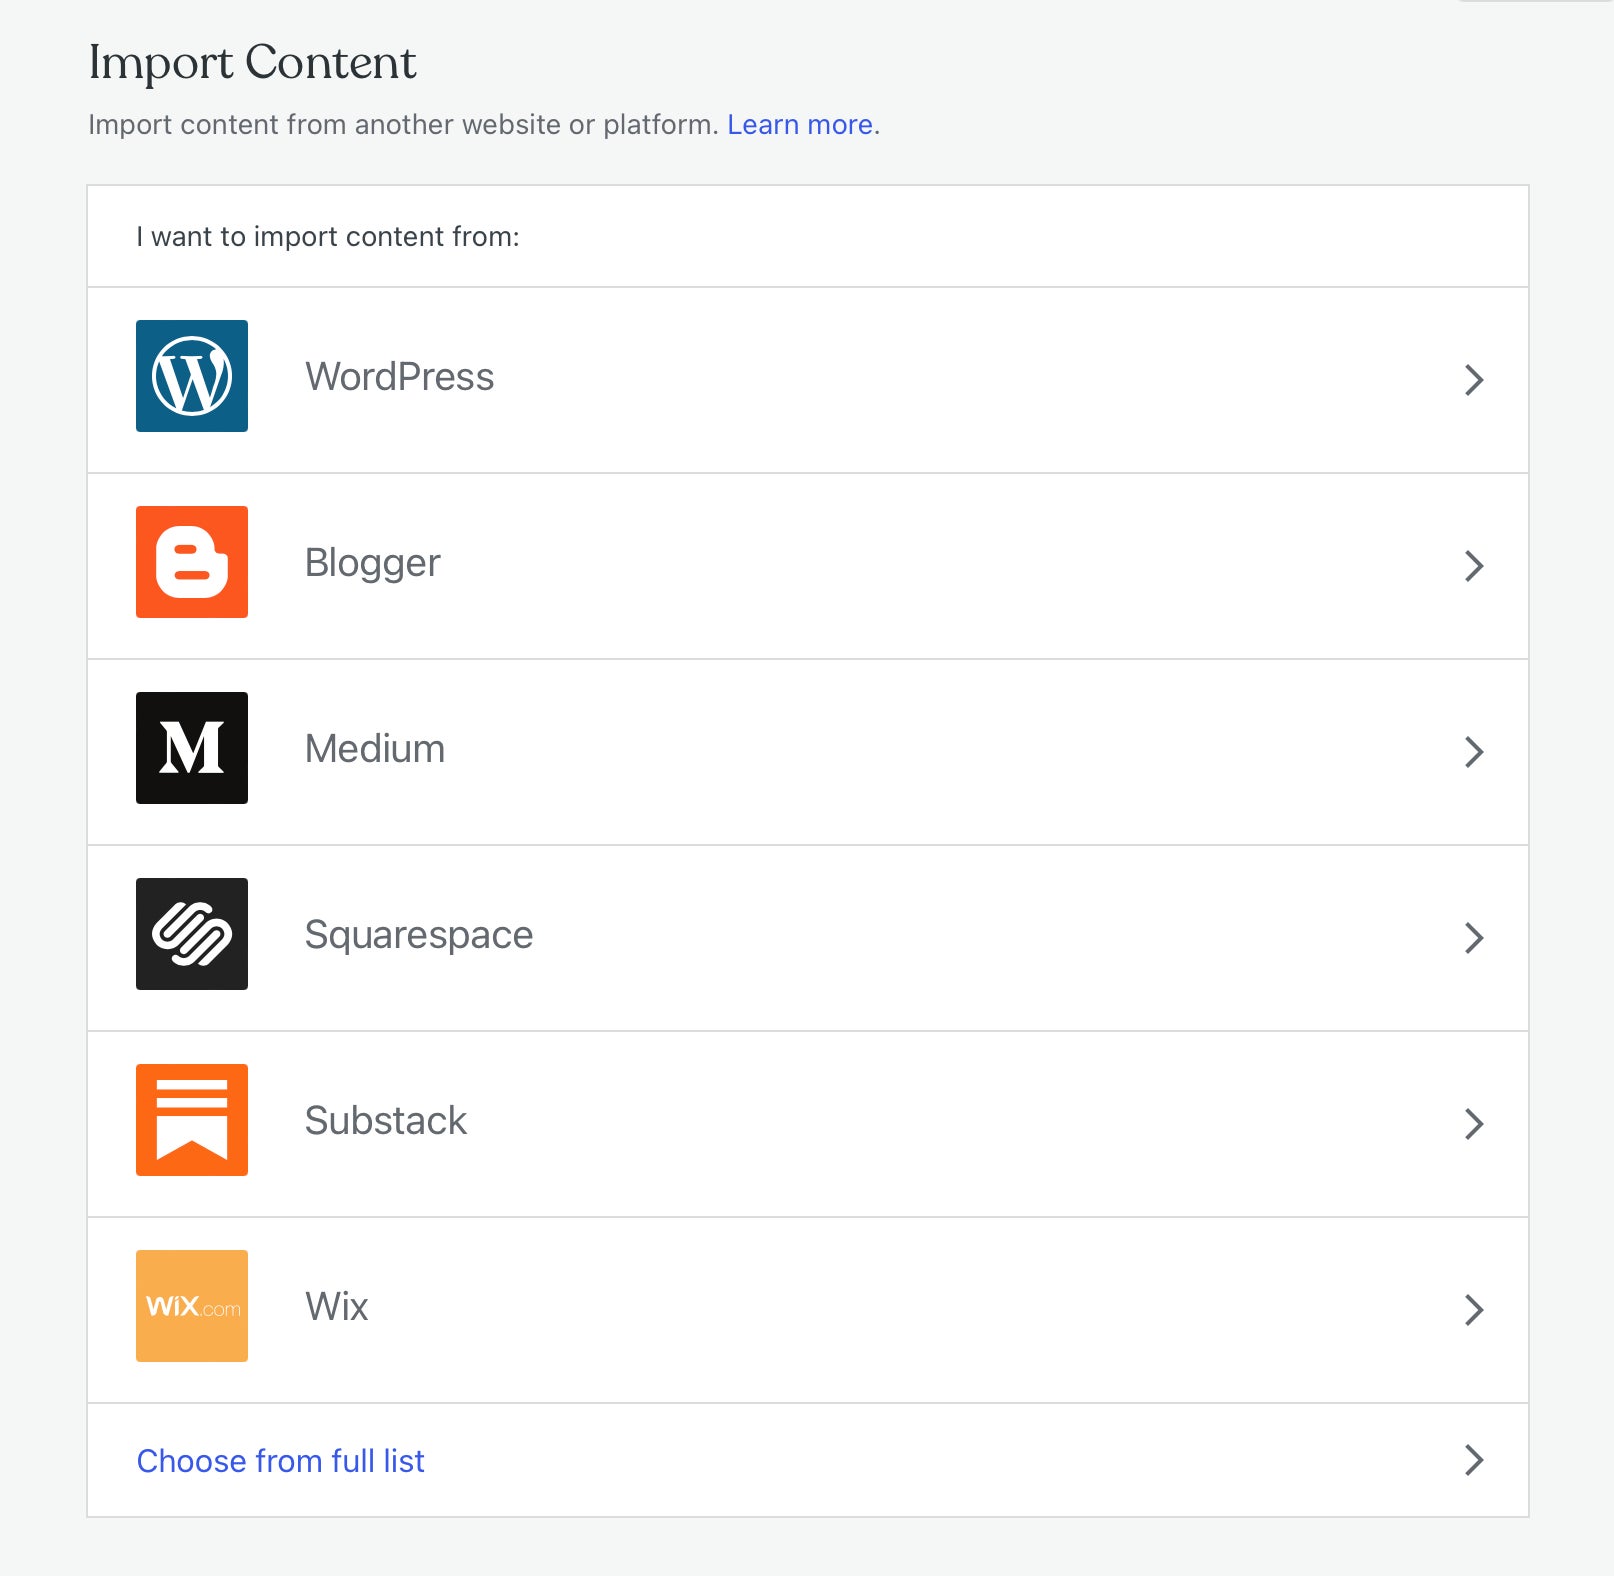 The WordPress tool for importing content, showing the list of compatible sites, plus a link to expand the list at the bottom, which you'll need to find the tool for importing from LiveJournal.